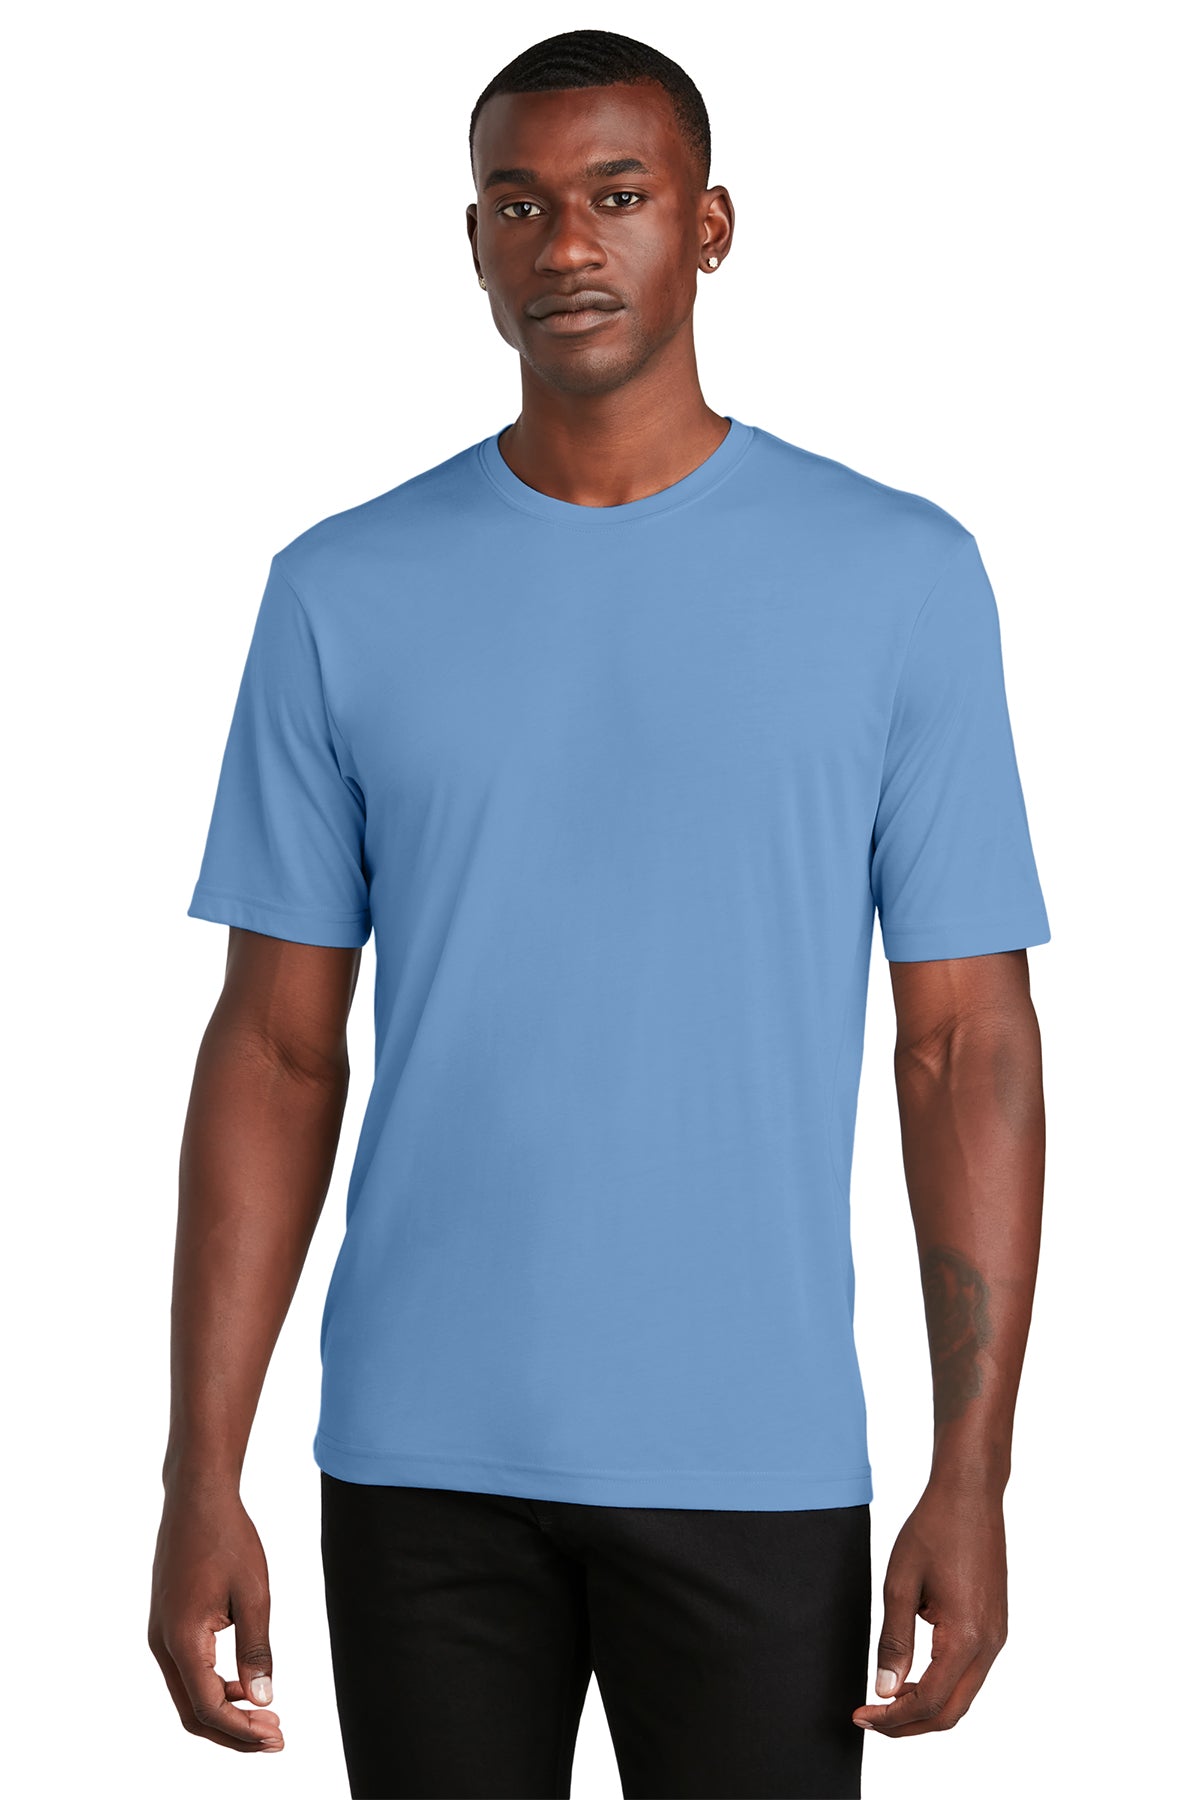 ST450 Sport-Tek® PosiCharge® Competitor™ Cotton Touch™ Tee